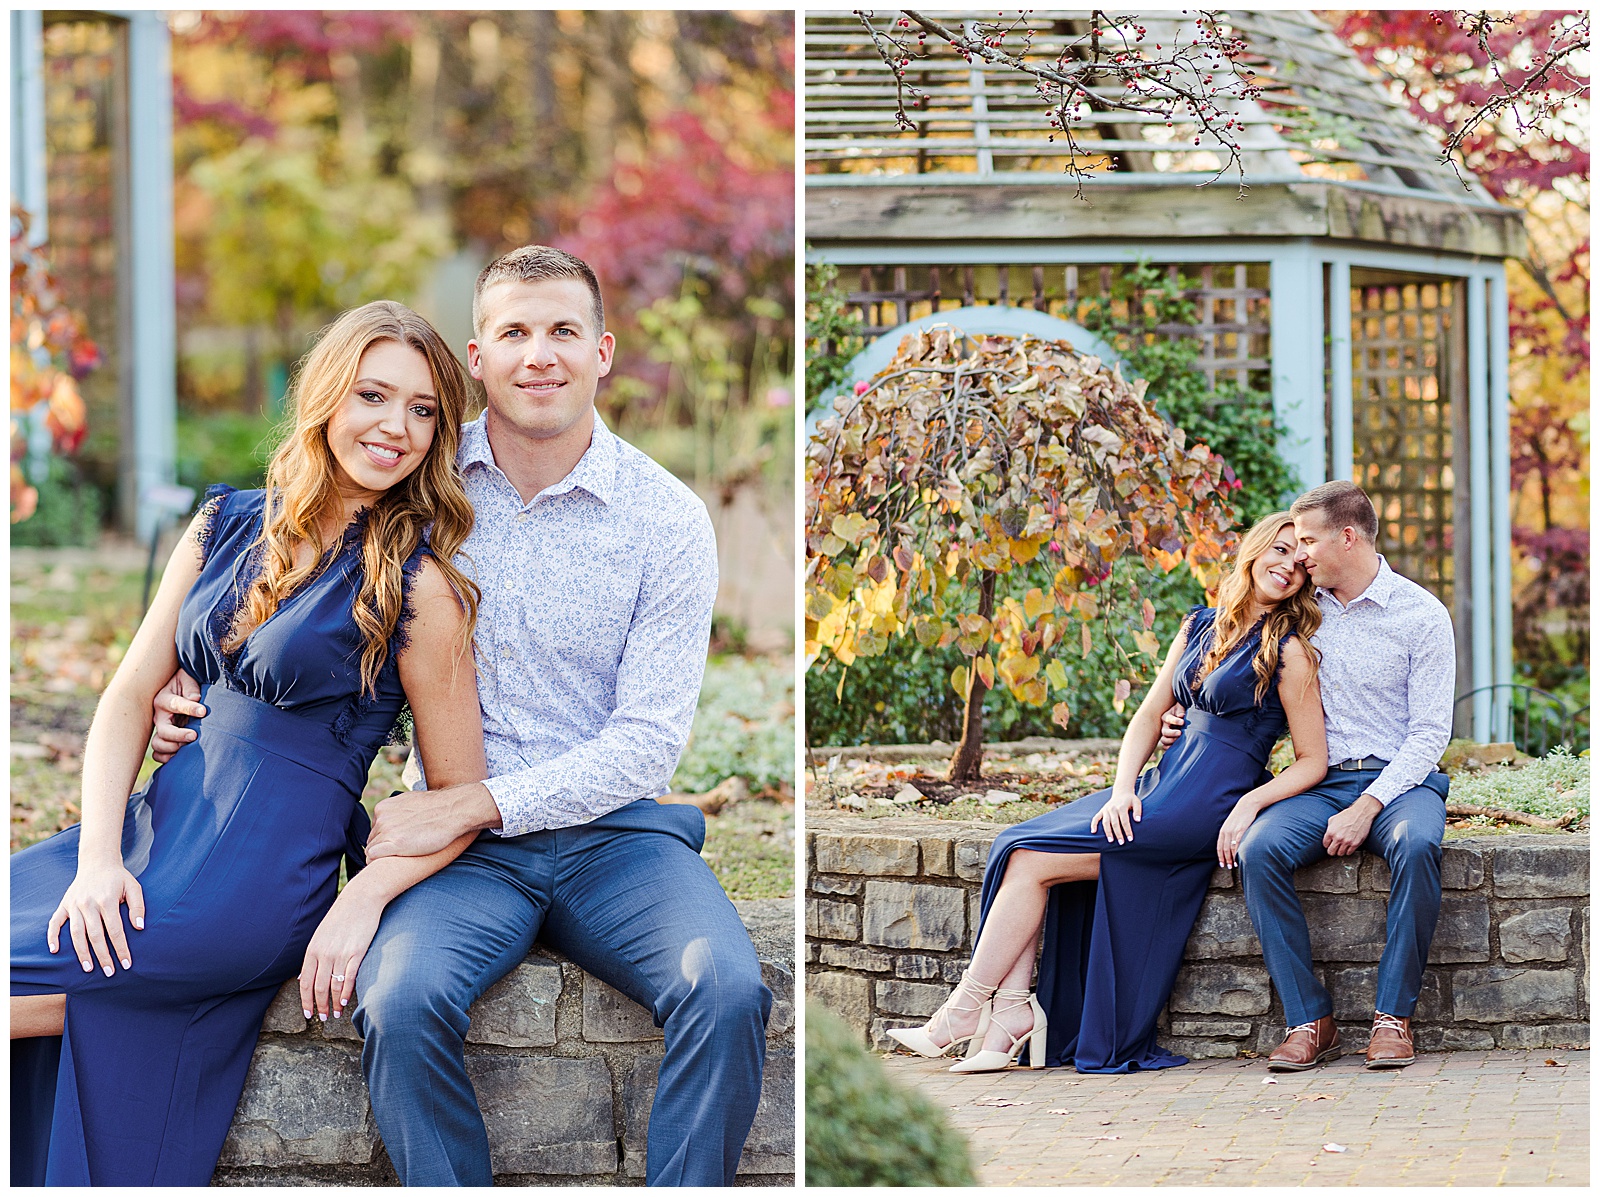 Engagement Session at Inniswood Gardens in Columbus